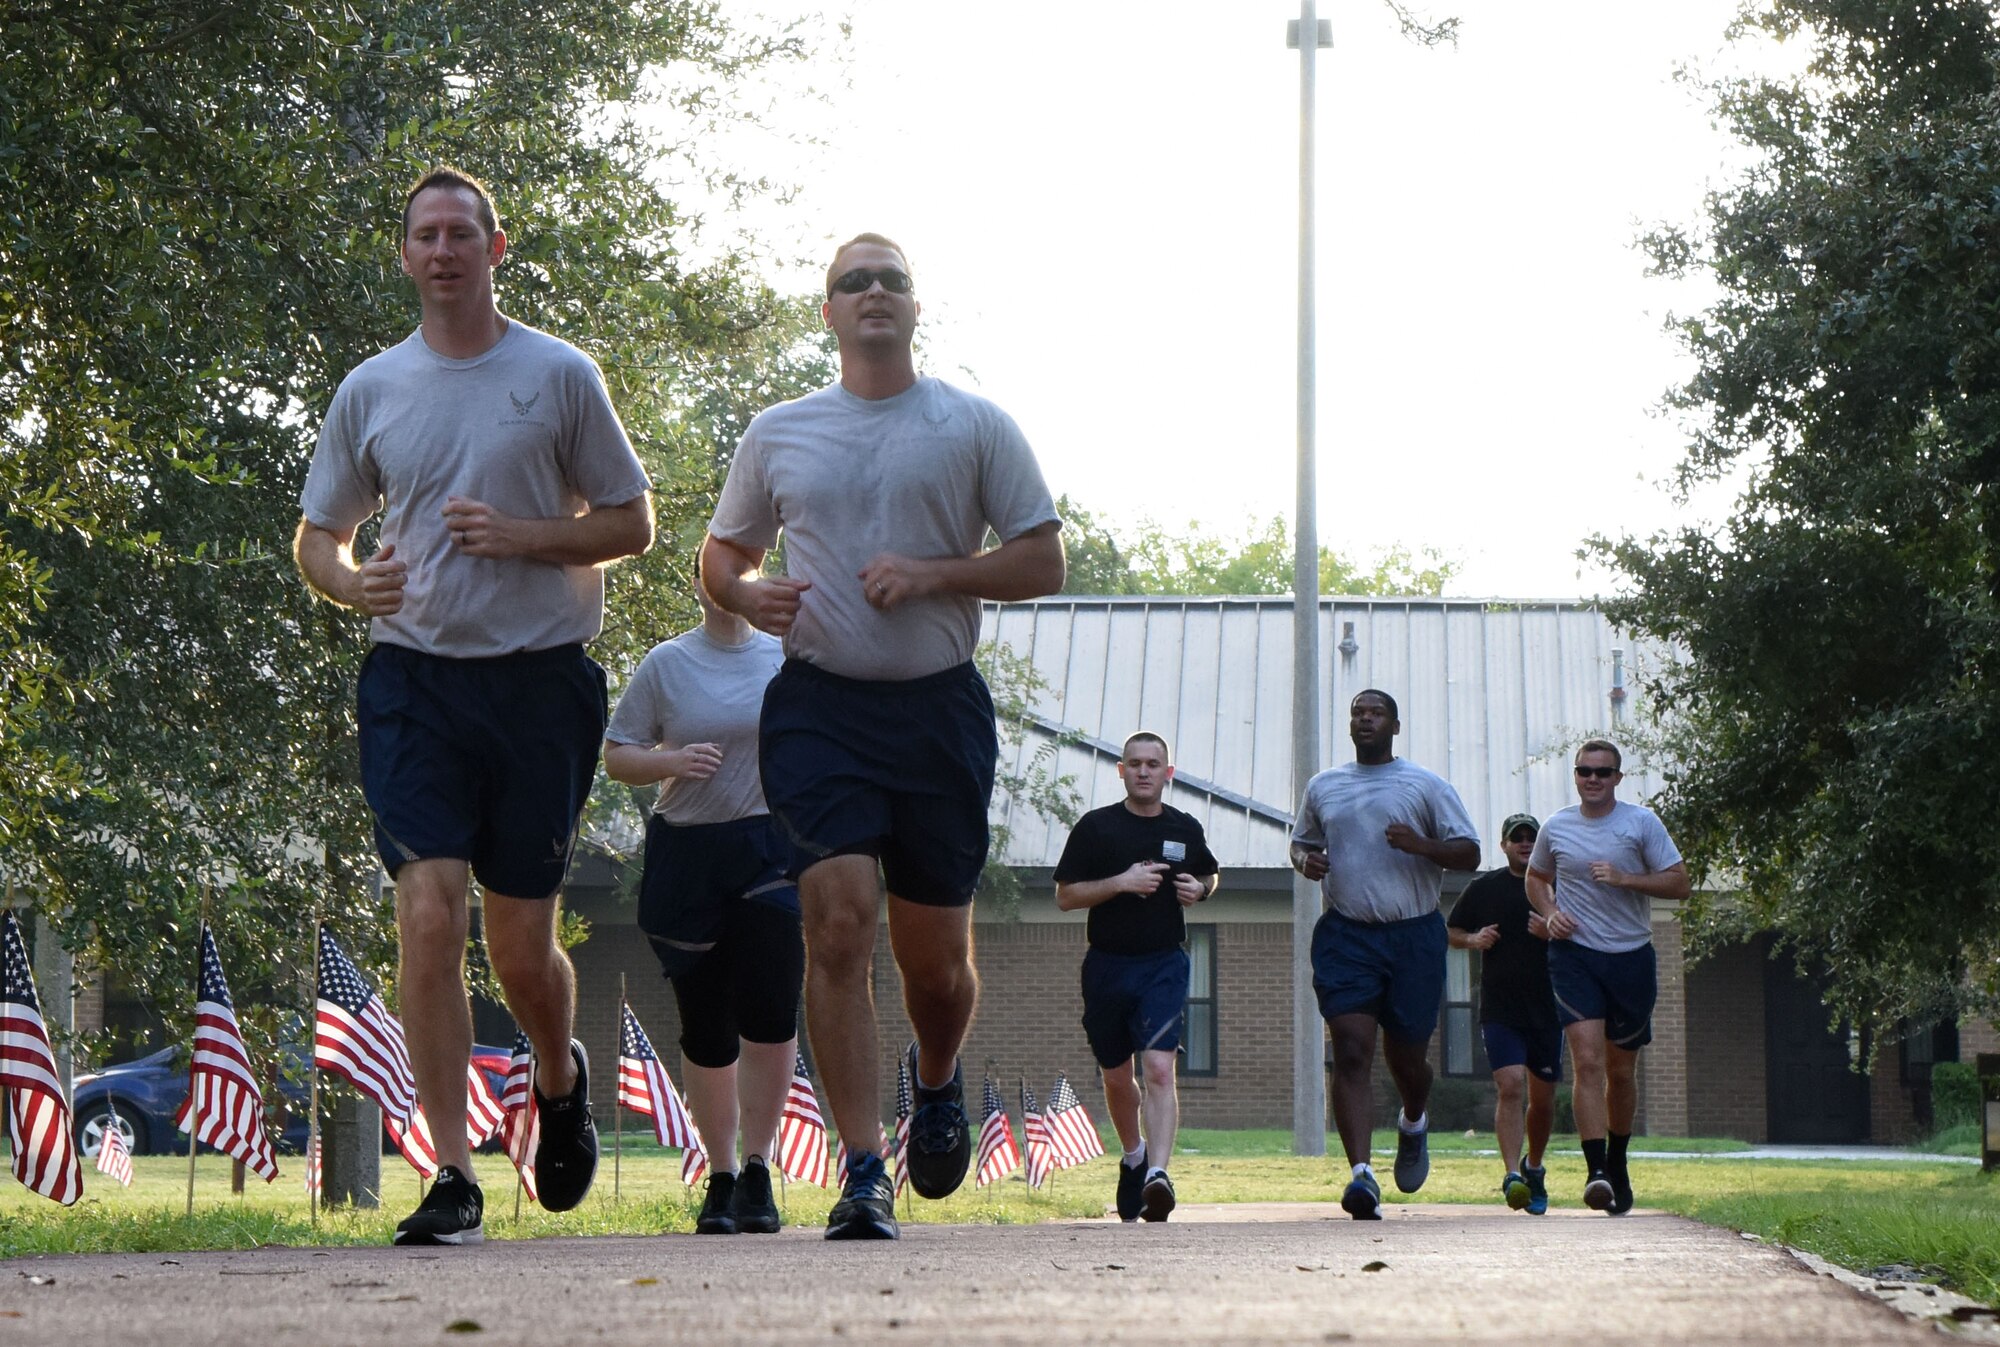 Members of the 81st Training Support Squadron participate in Keesler's POW/MIA 24-hour memorial run and vigil at the Crotwell Track at Keesler Air Force Base, Mississippi, Sept. 20, 2018. The event was held to raise awareness and pay tribute to all prisoners of war and those military members still missing in action. (U.S. Air Force photo by Kemberly Groue)